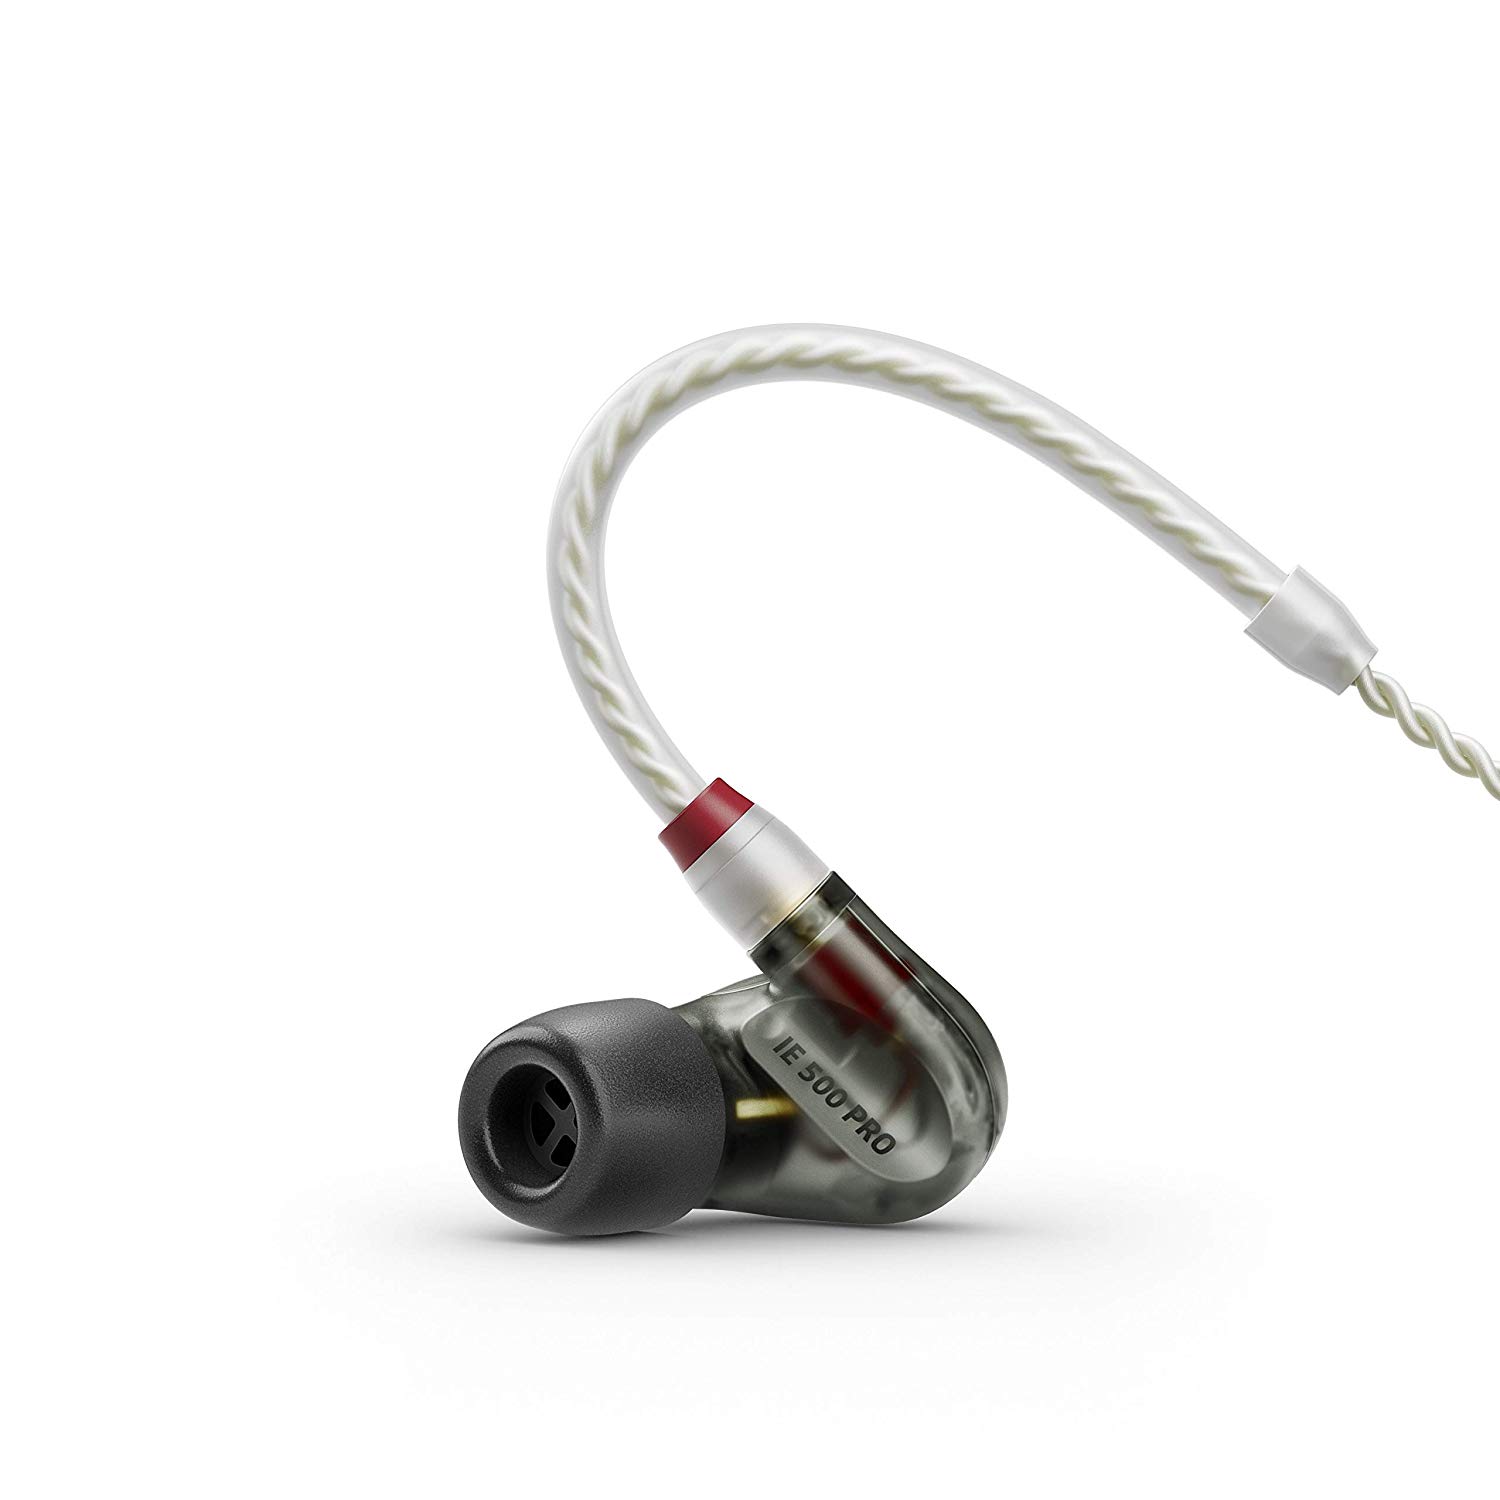 IE 400 Pro and IE 500 Pro best In Ear Headphones at a Special Price